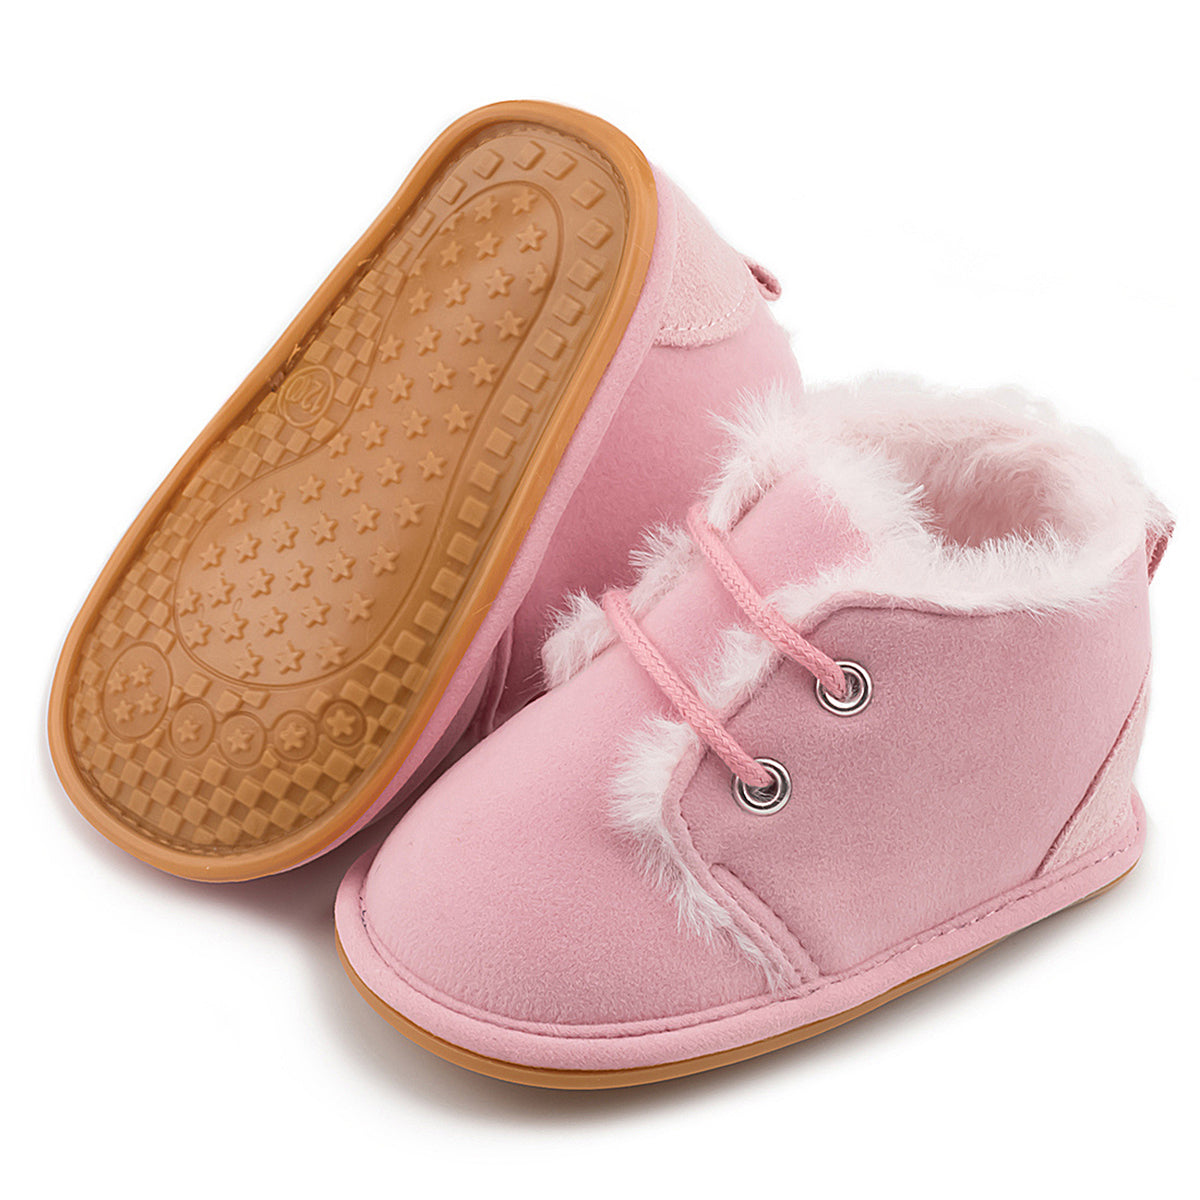 Round Toe Thermal Kid Sneakers Blush Pink / 4C Apparel and Accessories